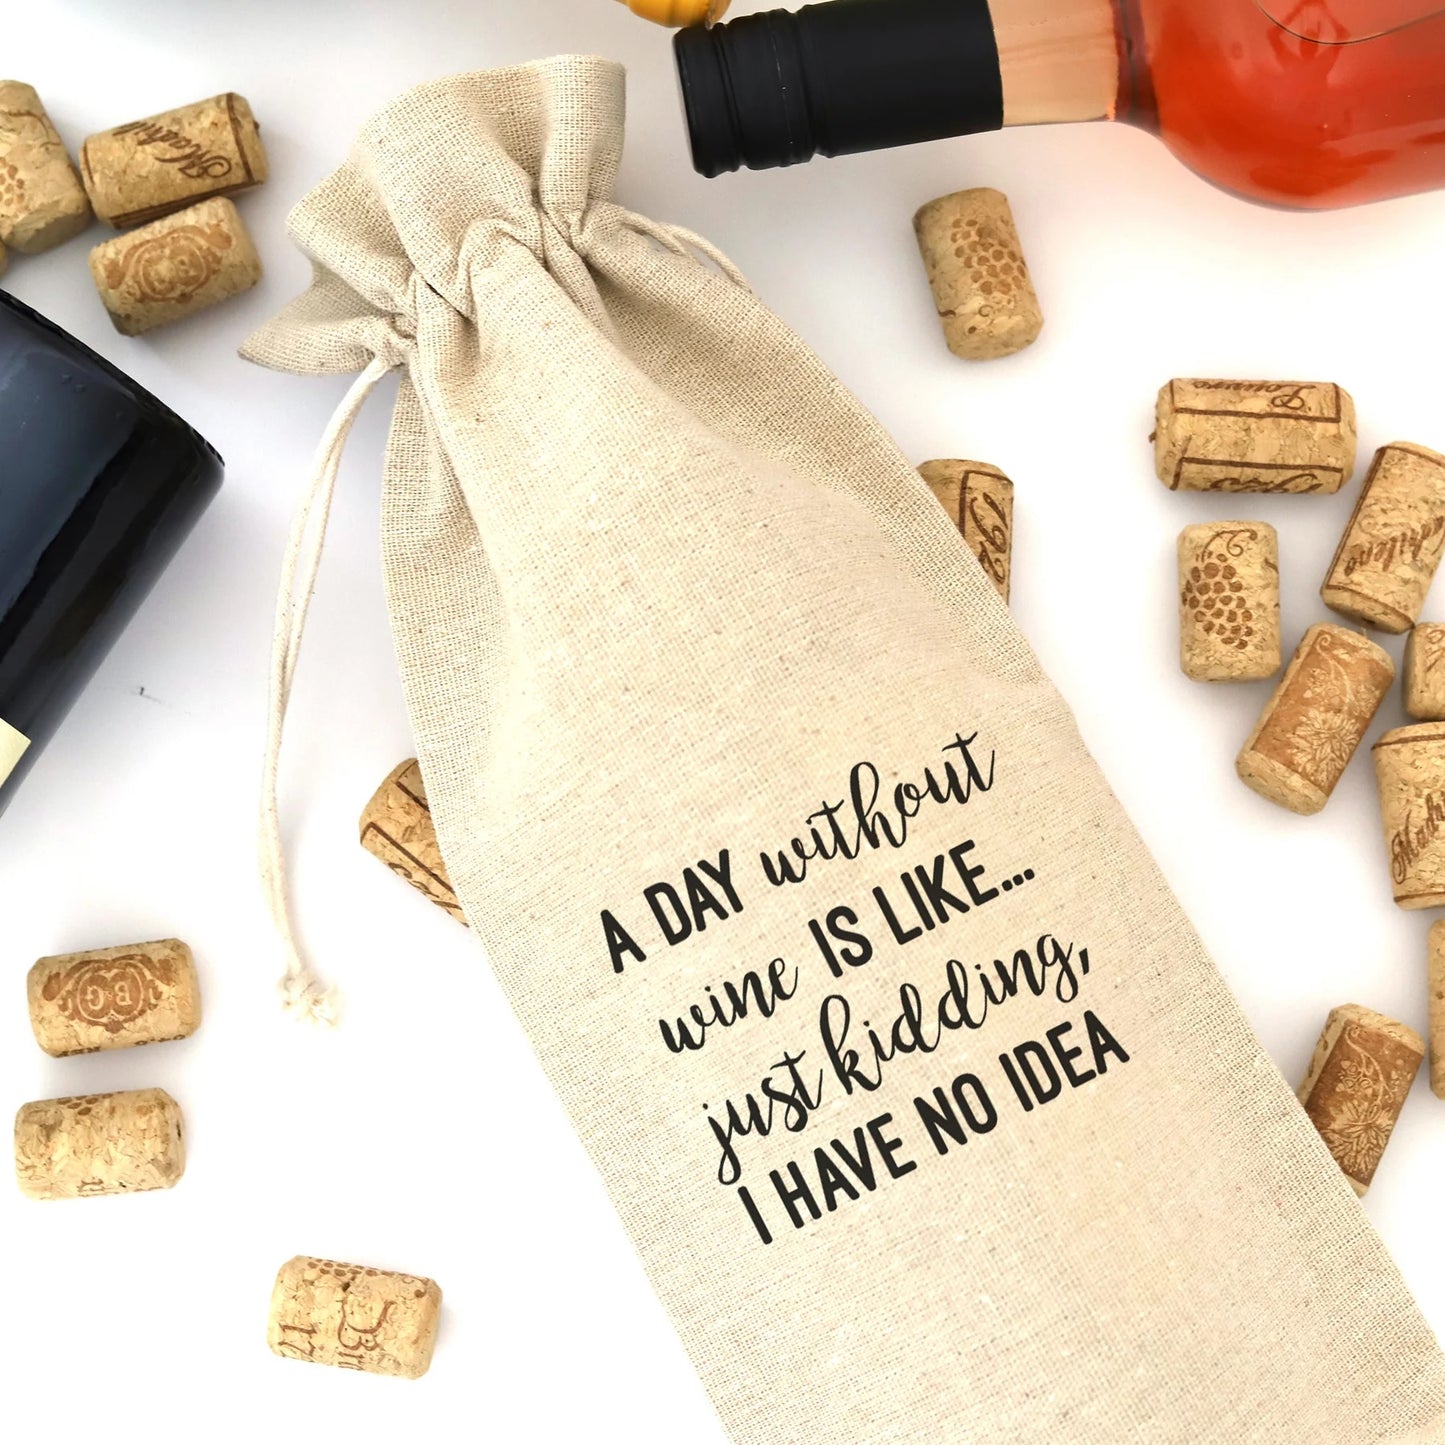 A wine bag with the words "A day without wine is like... just kidding, I have no idea" printed on it.